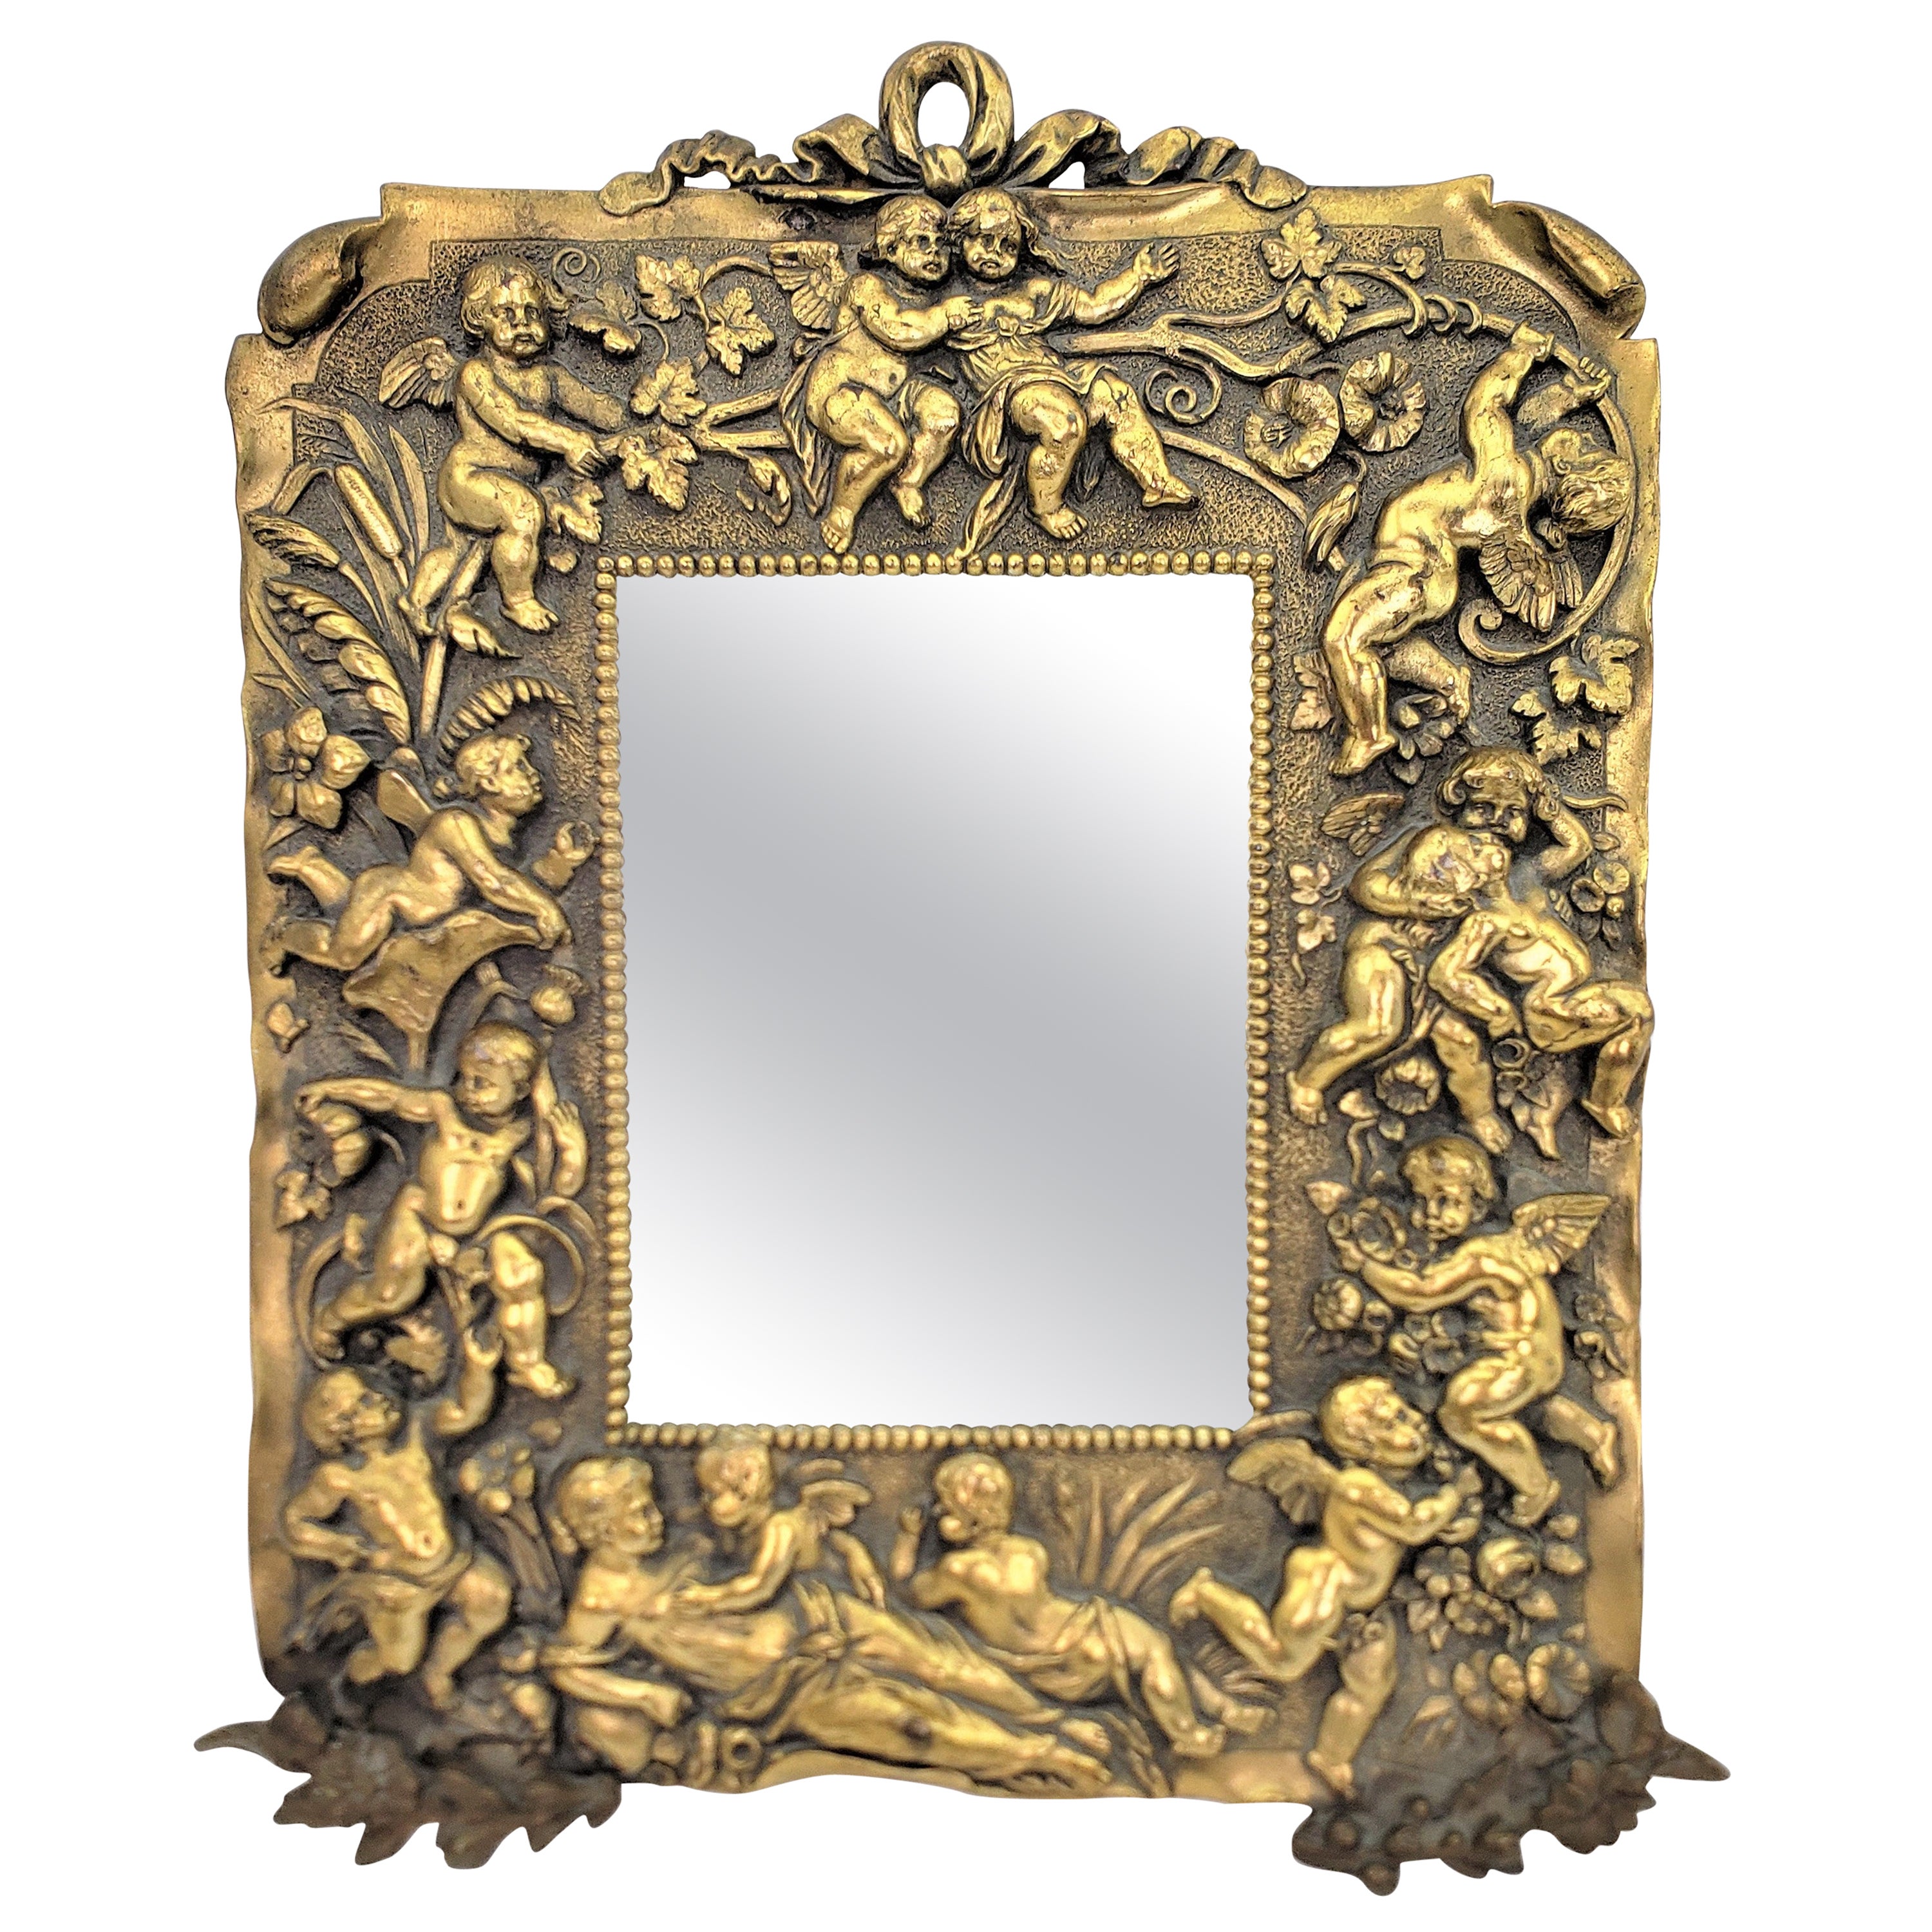 Antique Cast Bronze Table Mirror or Picture Frame with Cherubs & Floral Motif